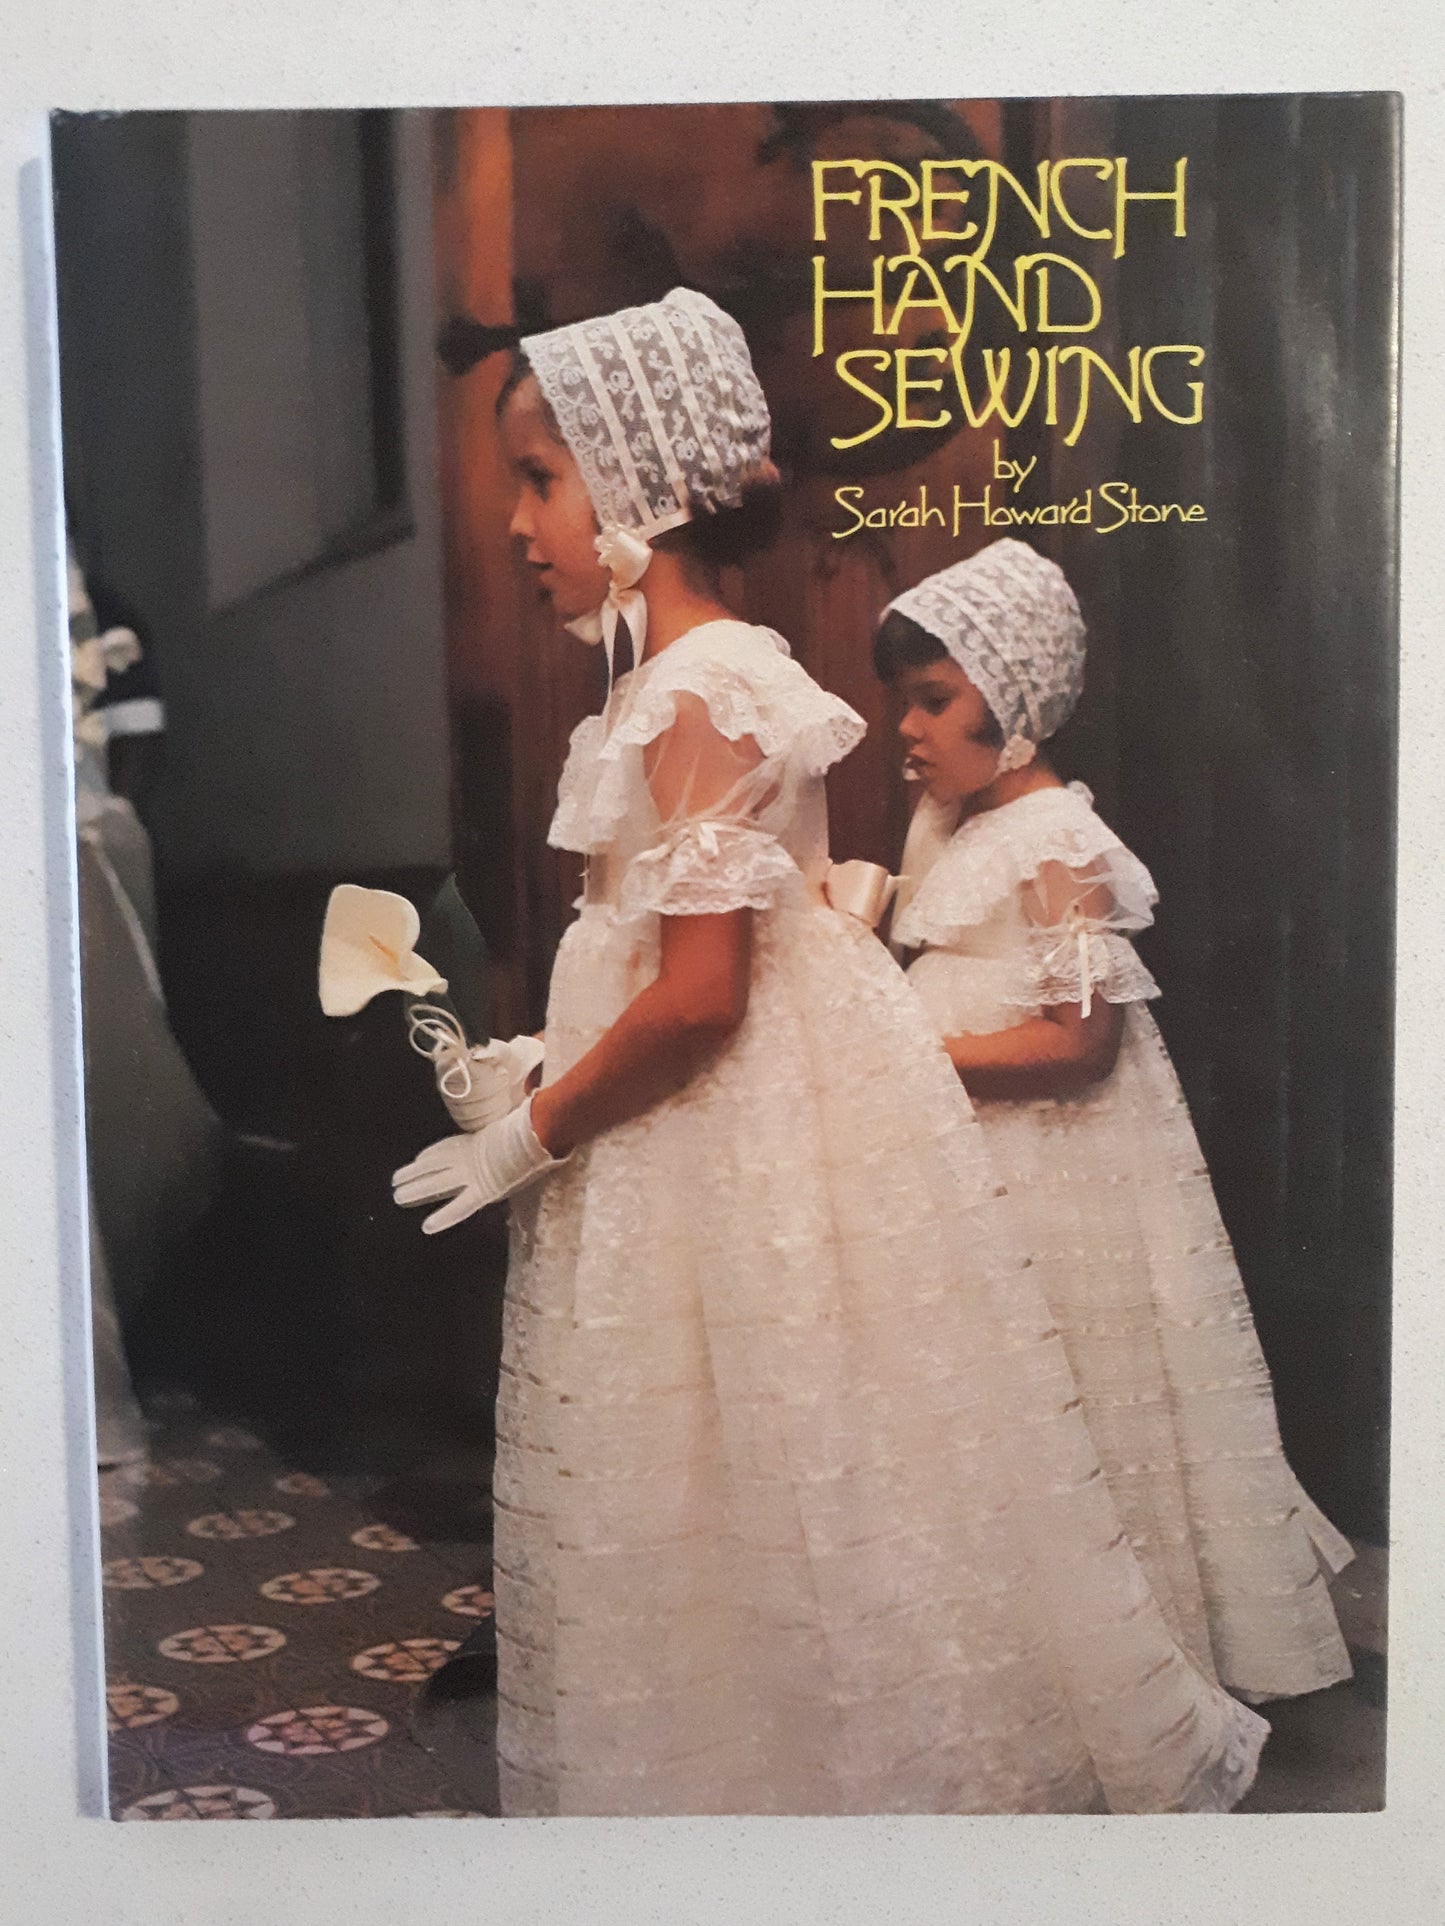 French Hand Sewing by Sarah Howard Stone